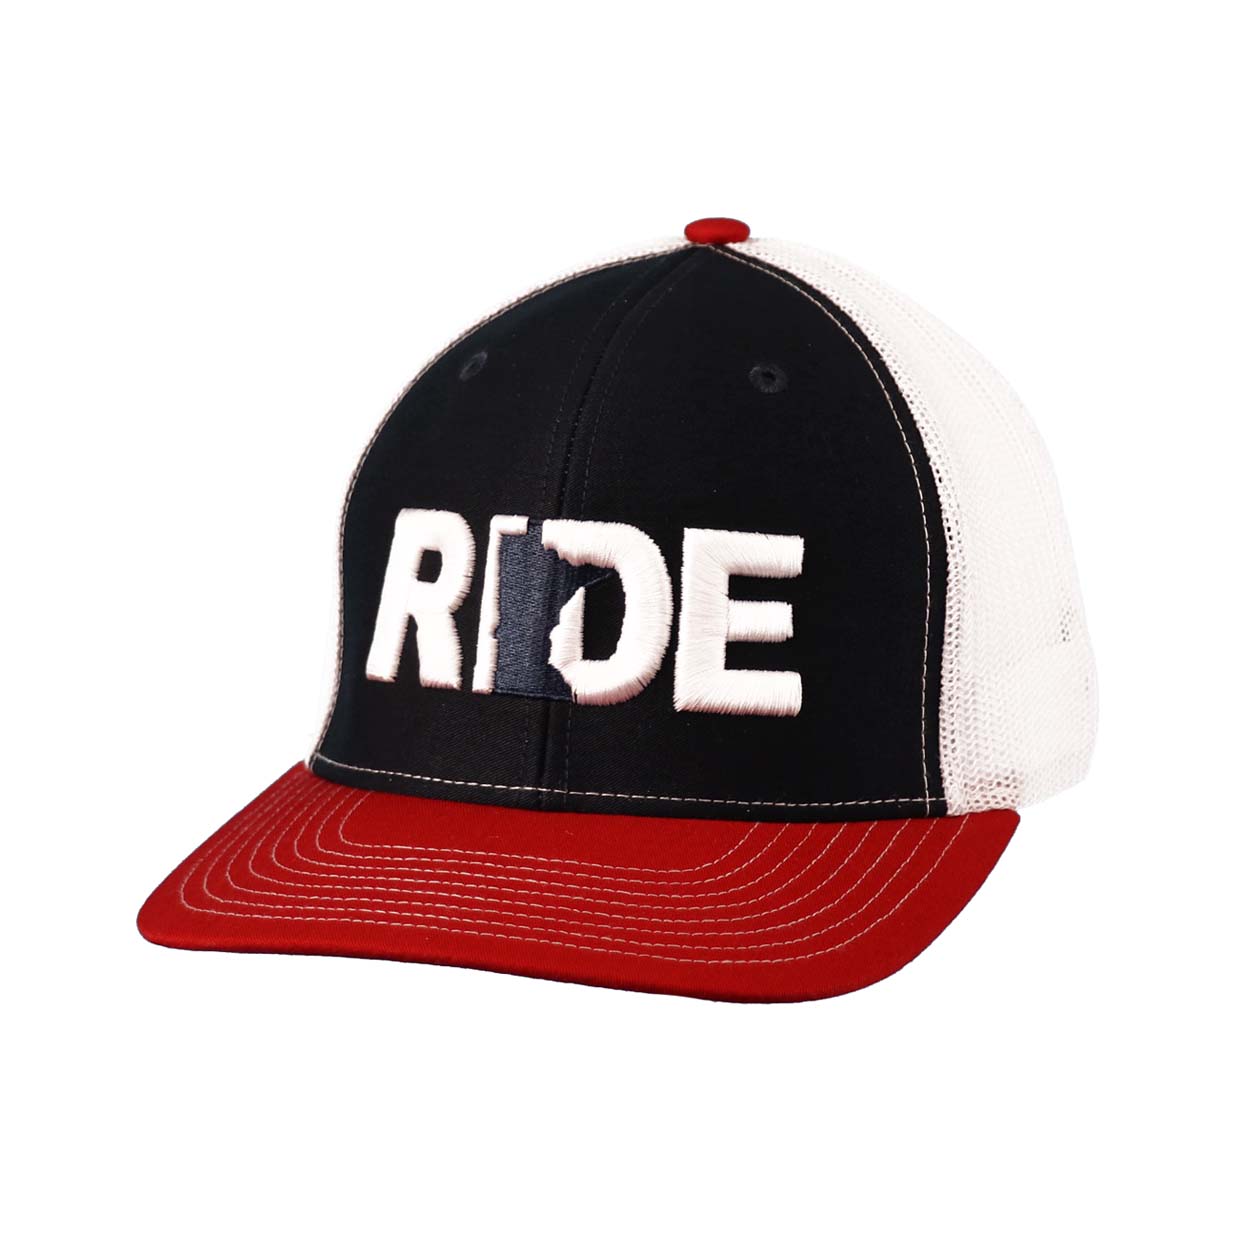 Ride Minnesota Classic Embroidered Snapback Trucker Hat Blue/White/Red